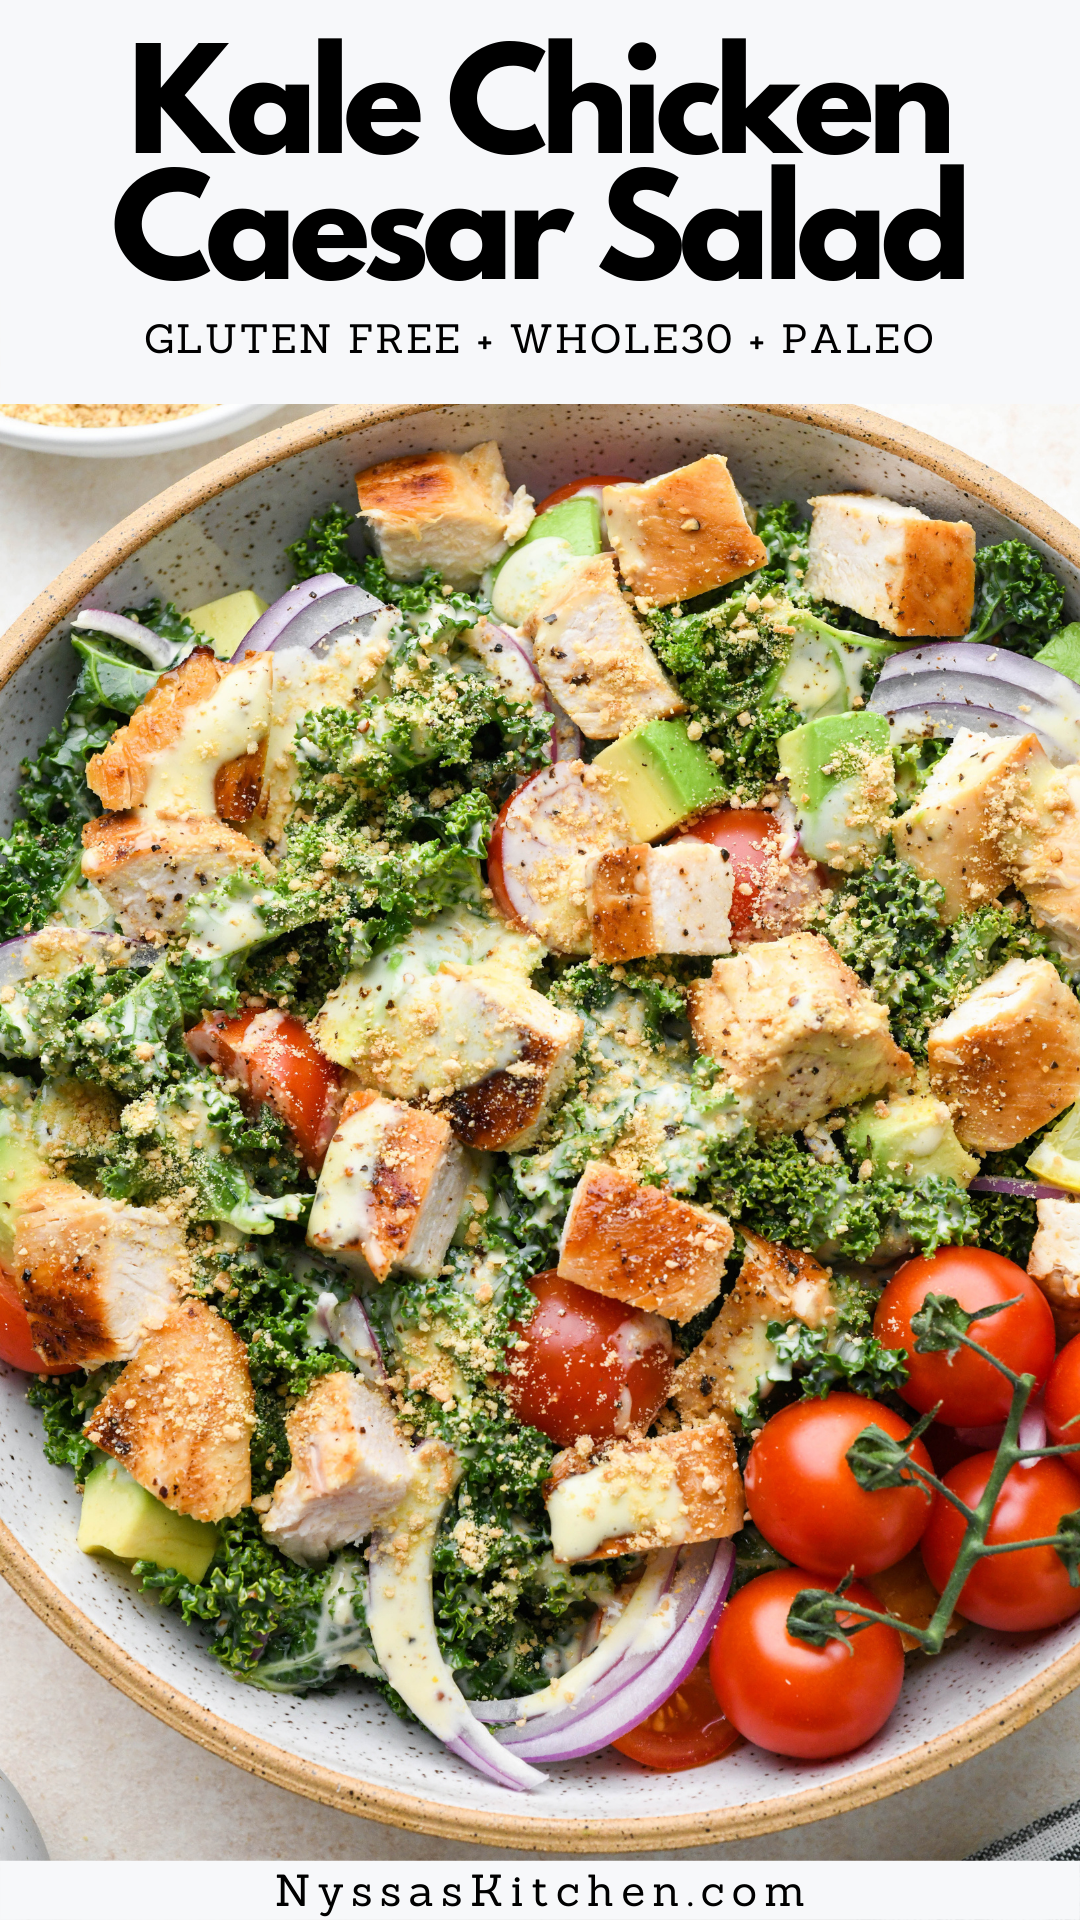 This Whole30 kale chicken Caesar salad is SUCH a crave worthy Whole30 meal! Made with hearty kale, perfectly seasoned chicken, a delightfully creamy homemade Whole30 caesar dressing, tomatoes, avocado, and red onion, and topped with a dairy free parmesan "cheese". Just like your favorite Caesar salad, but healthier! Whole30, paleo, gluten free, dairy Free.